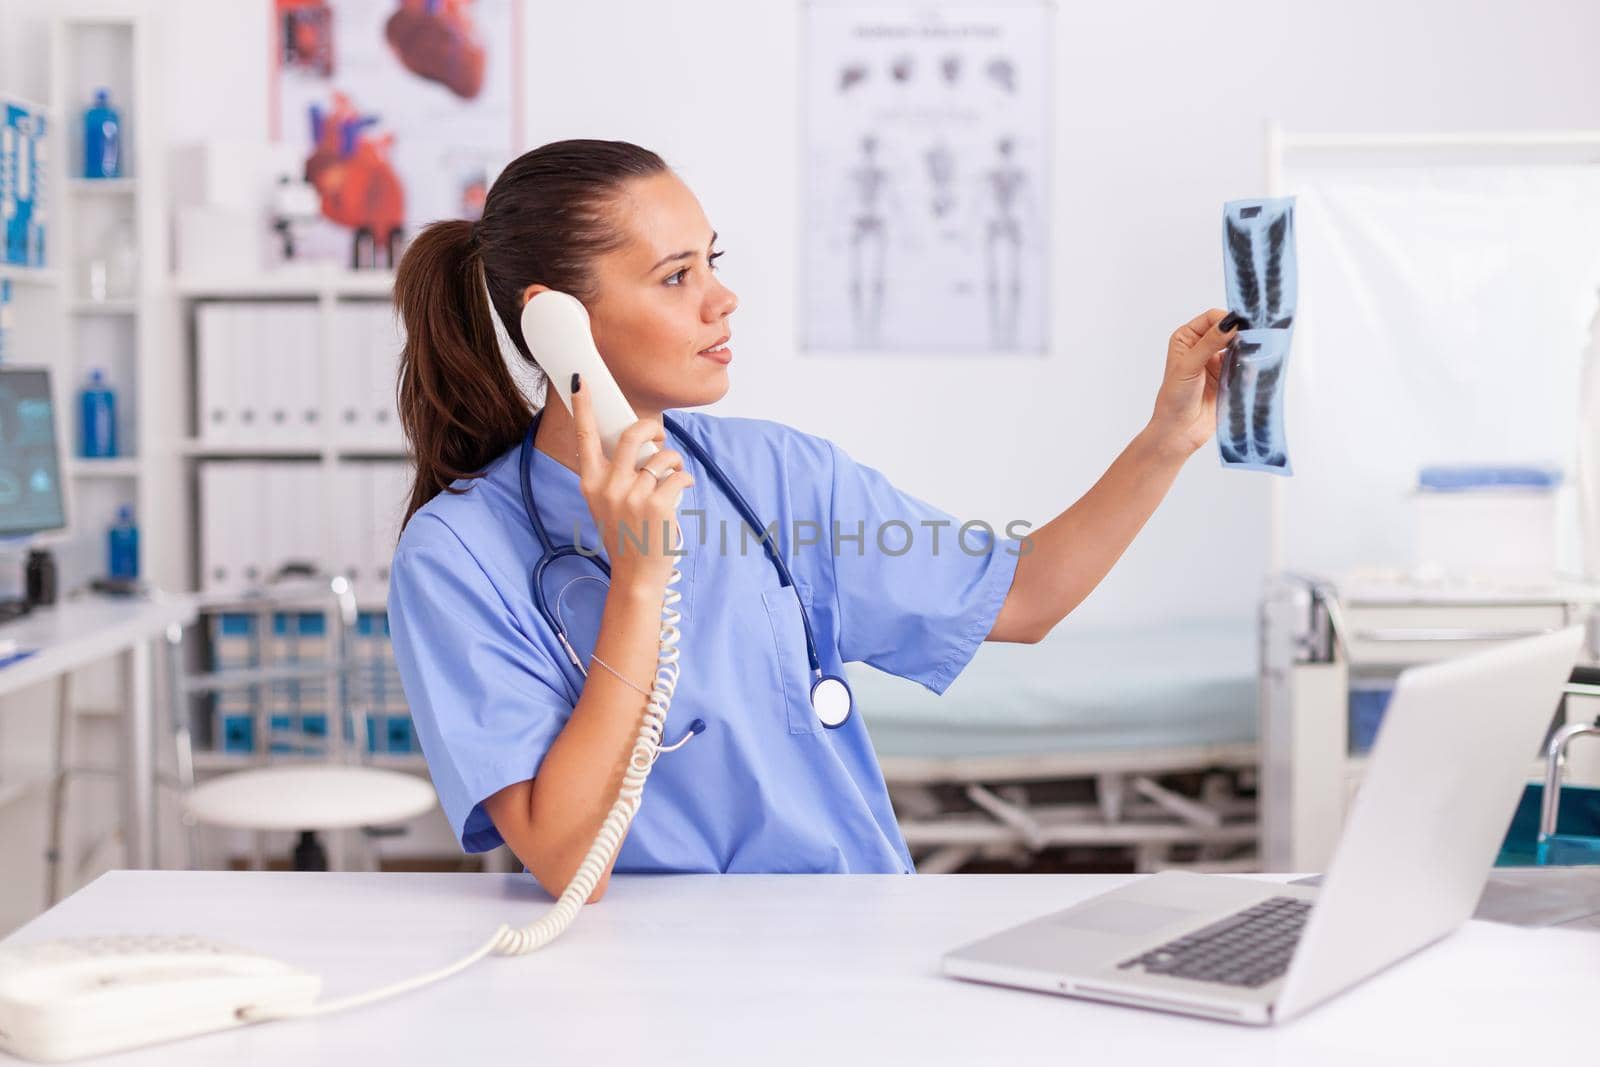 Medical nurse holding patient radiography in hospital office while talking with doctor on phone. Health care physician sitting at desk using computer in modern clinic looking at monitor.